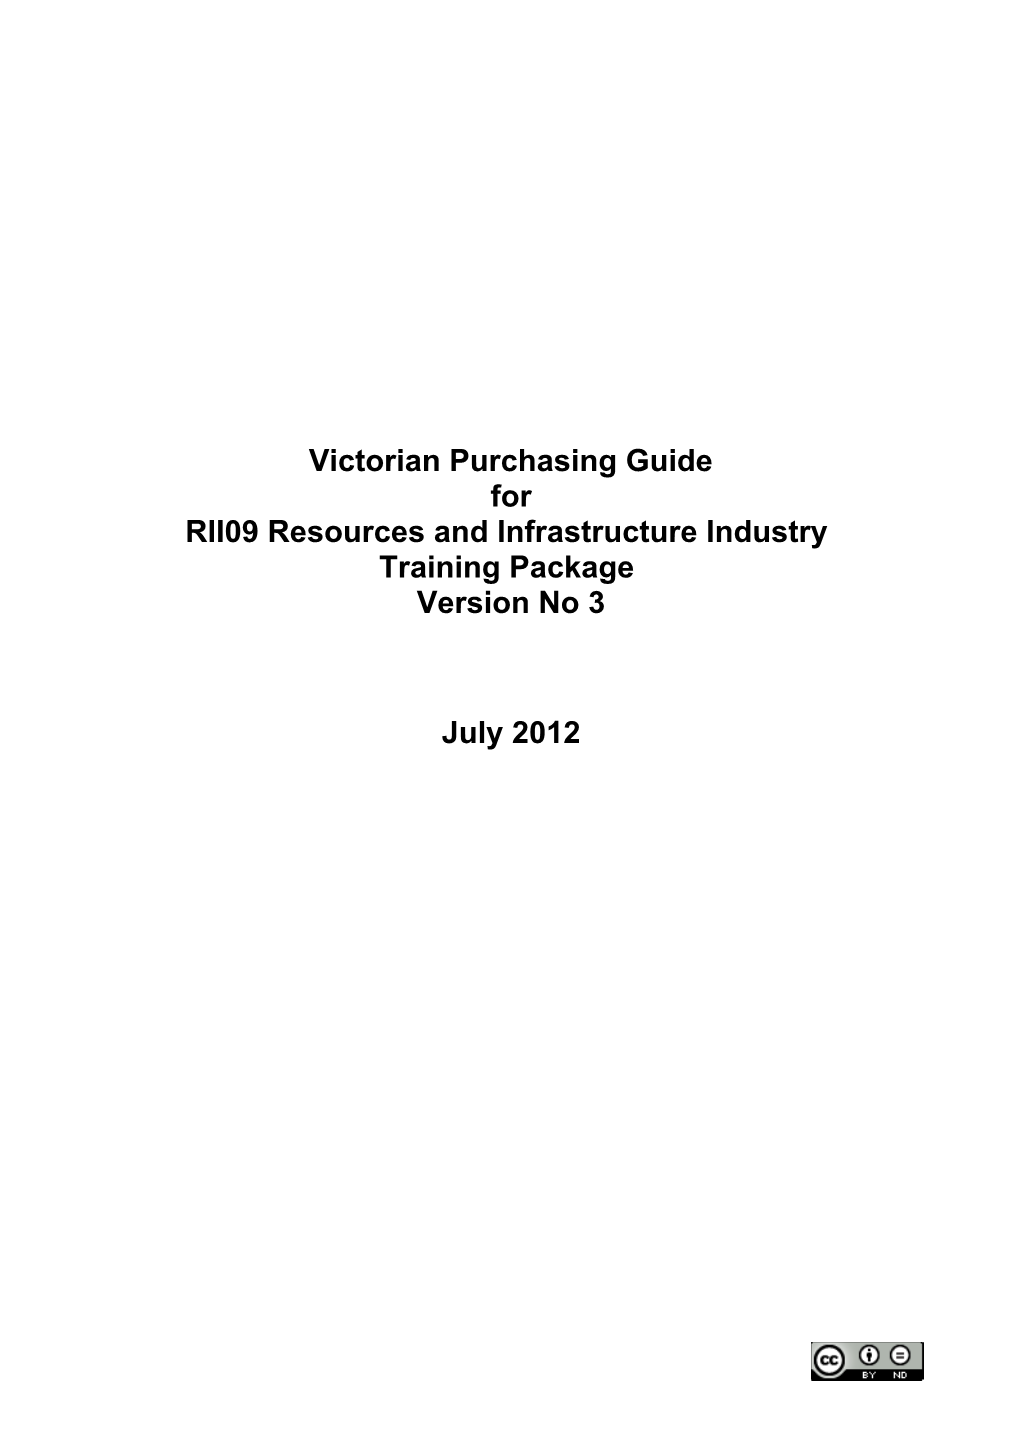 Victorian Purchasing Guide for RII09 Resources and Infrastructure Industry Version 3